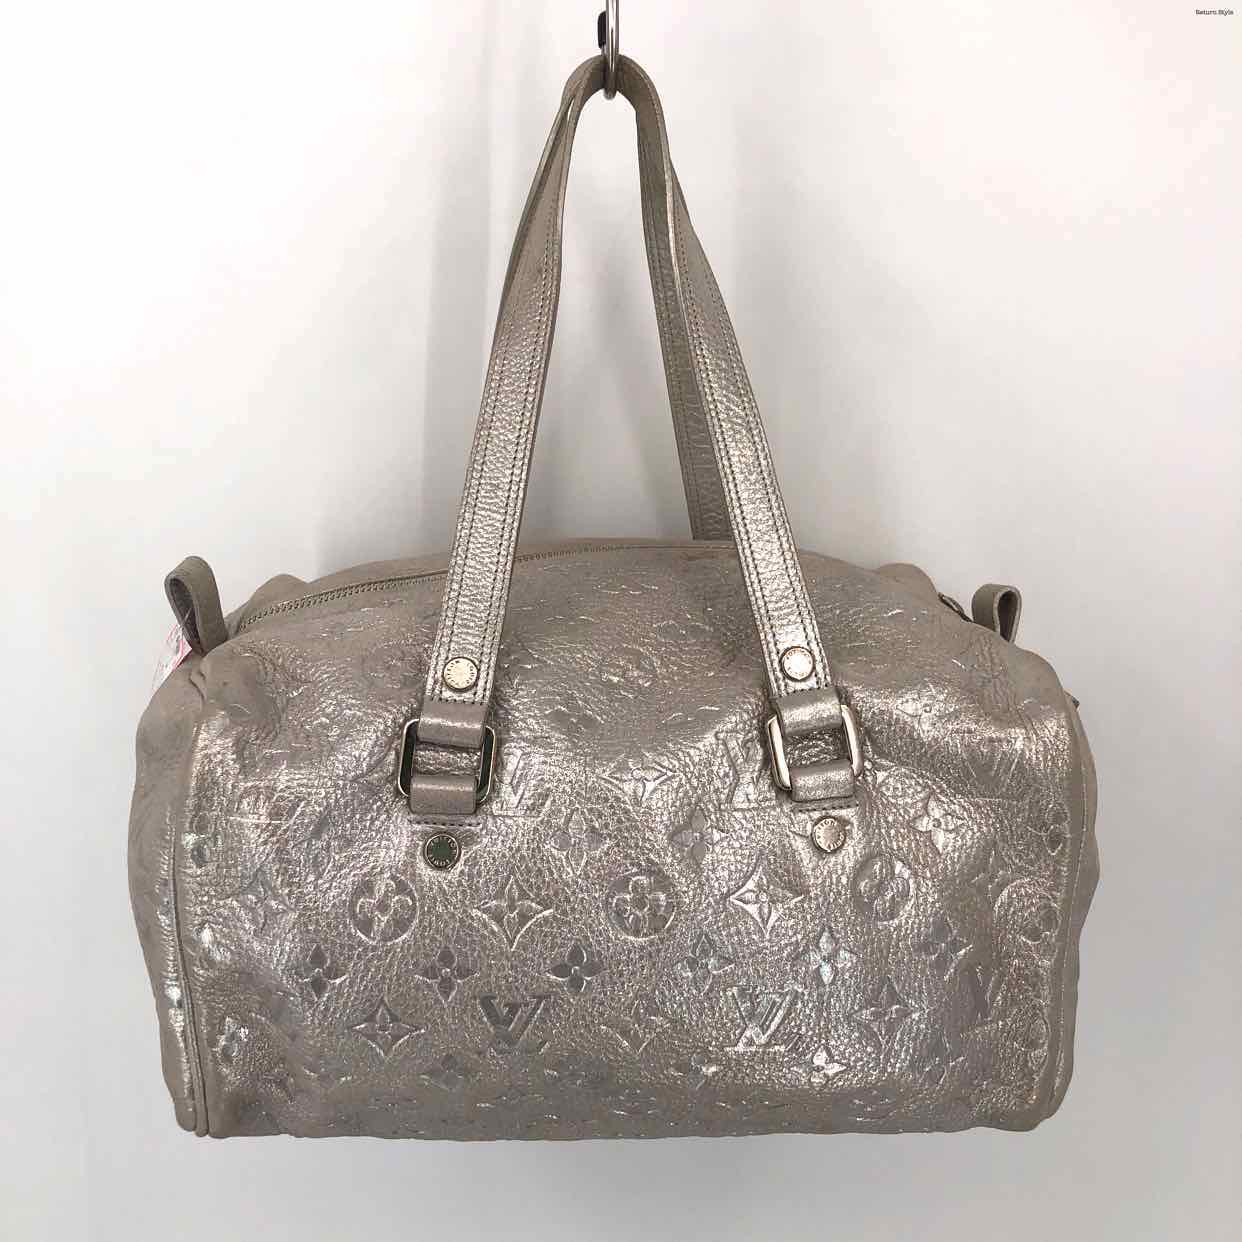 LOUIS VUITTON Silver Leather Pre Loved AS IS Boston Purse – ReturnStyle